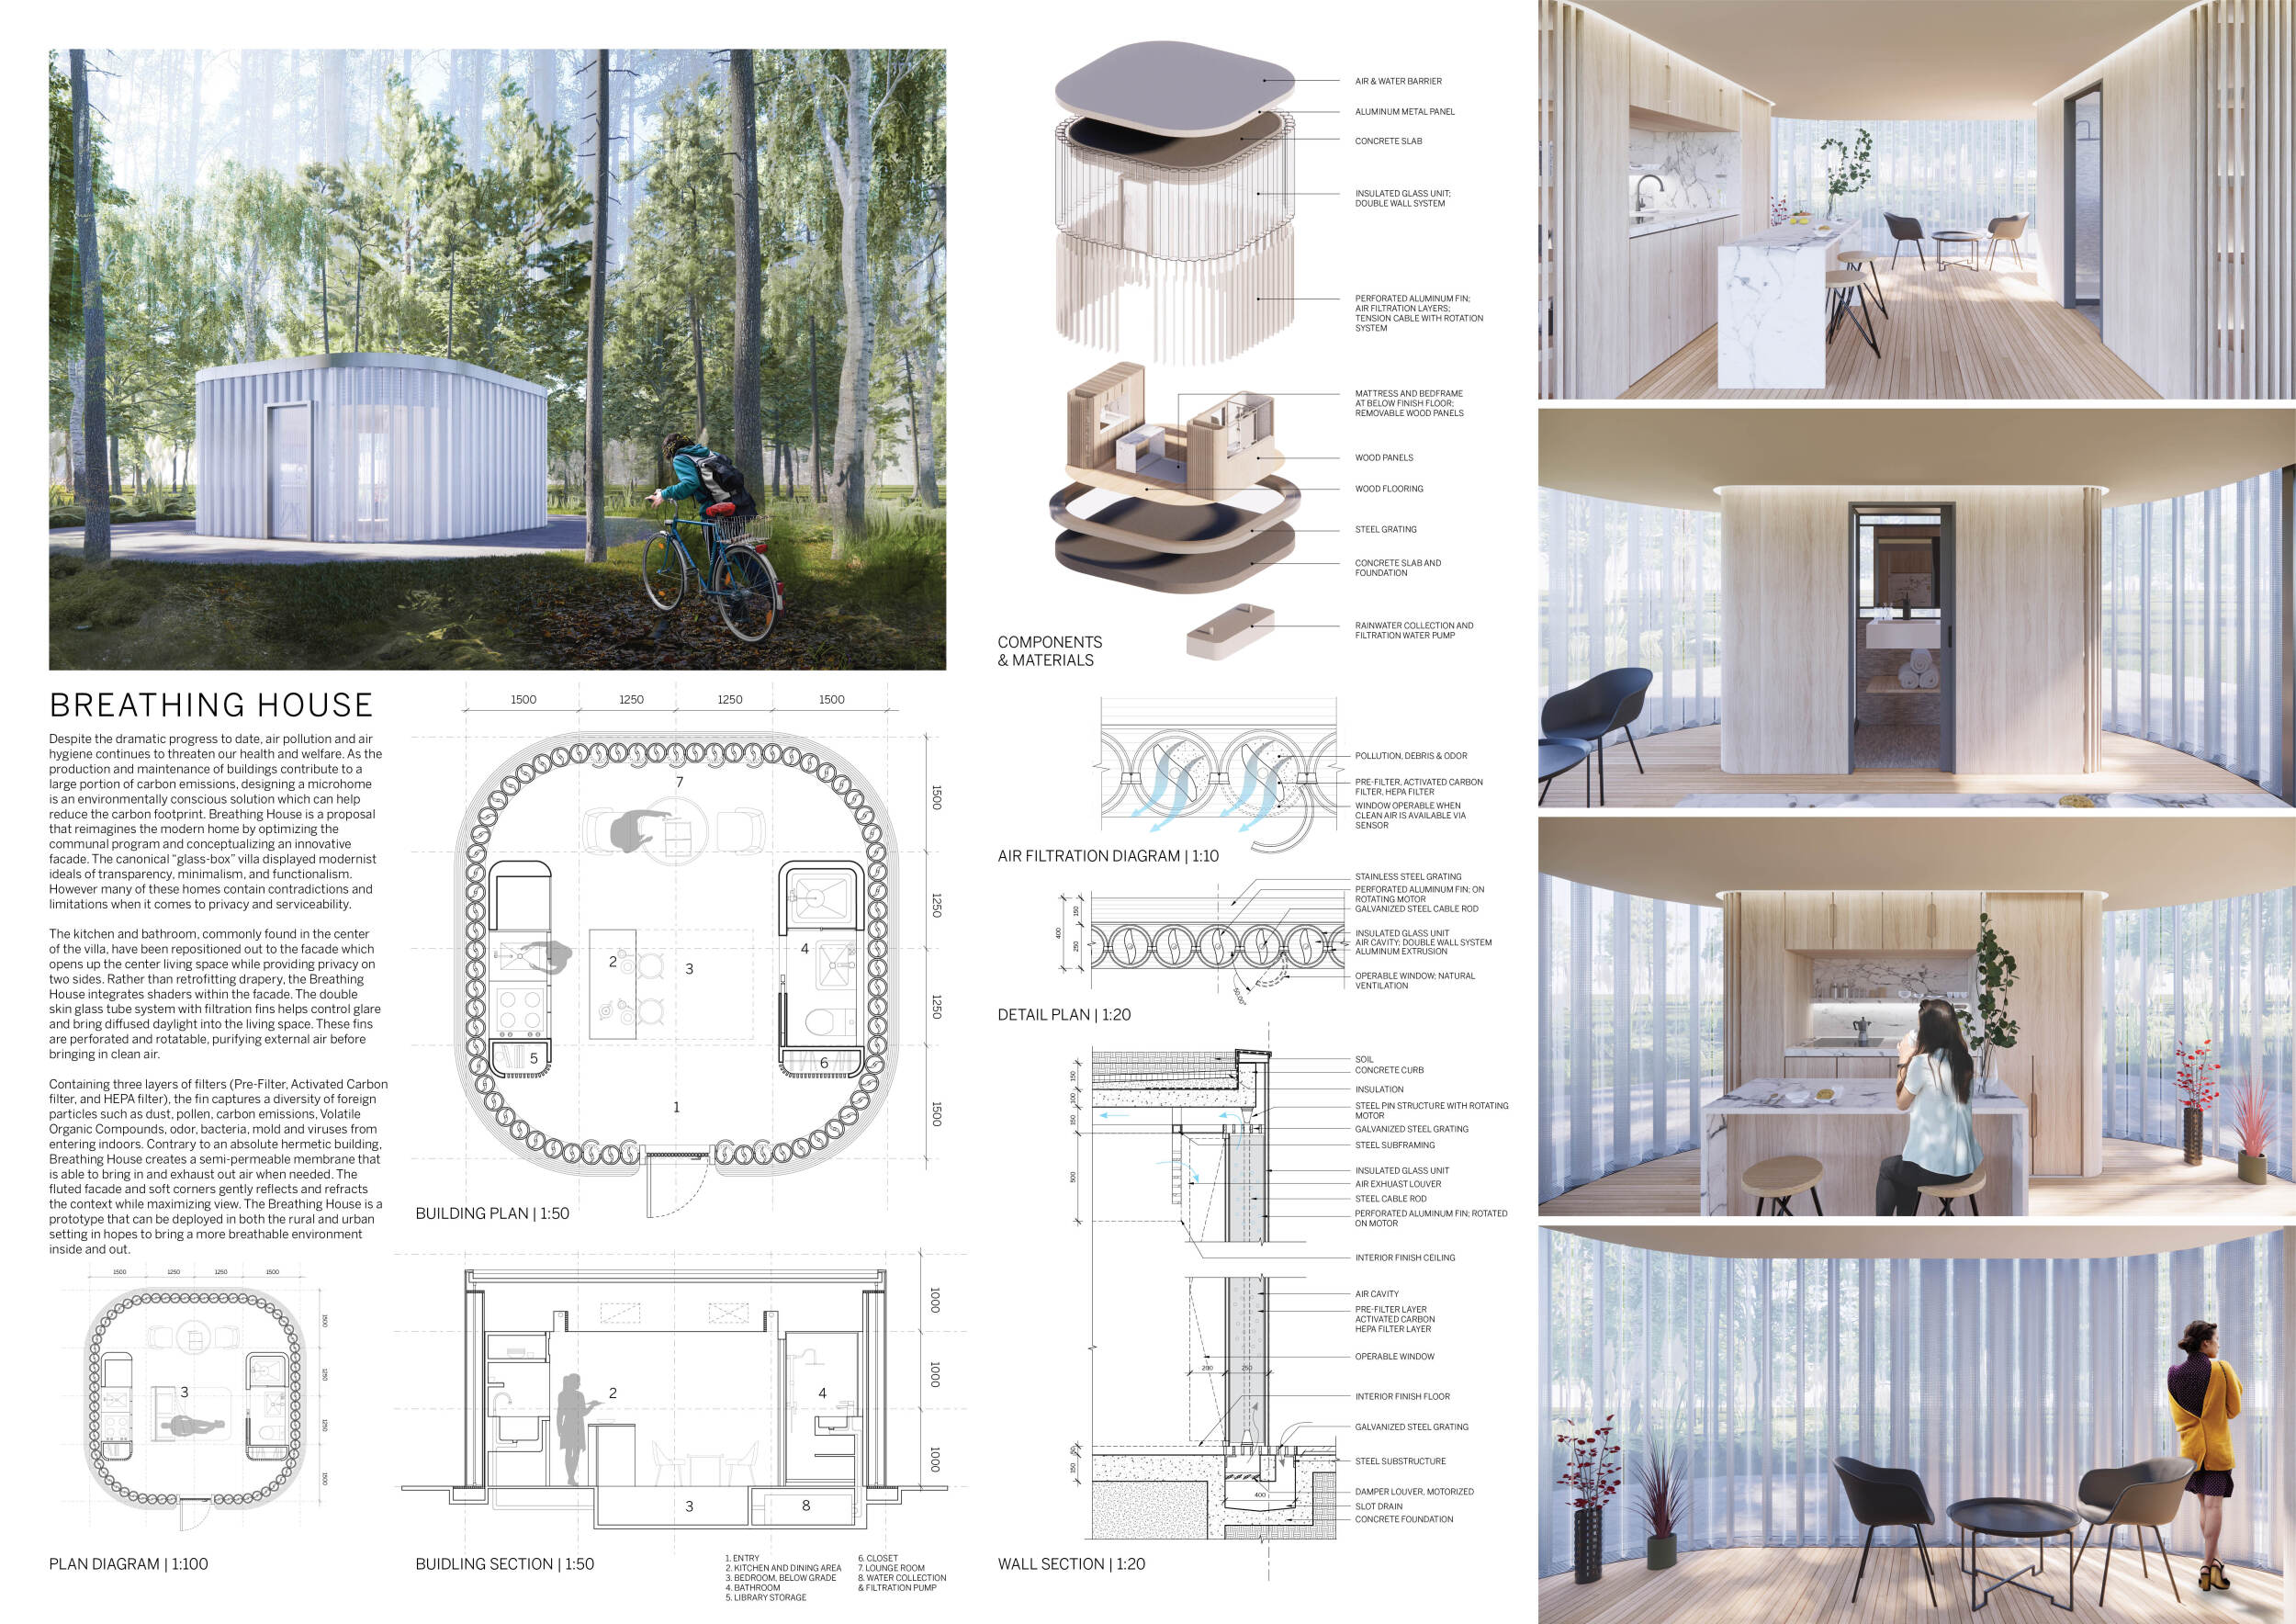 Microhome 2020 Small Living Huge Impact Competition Winners